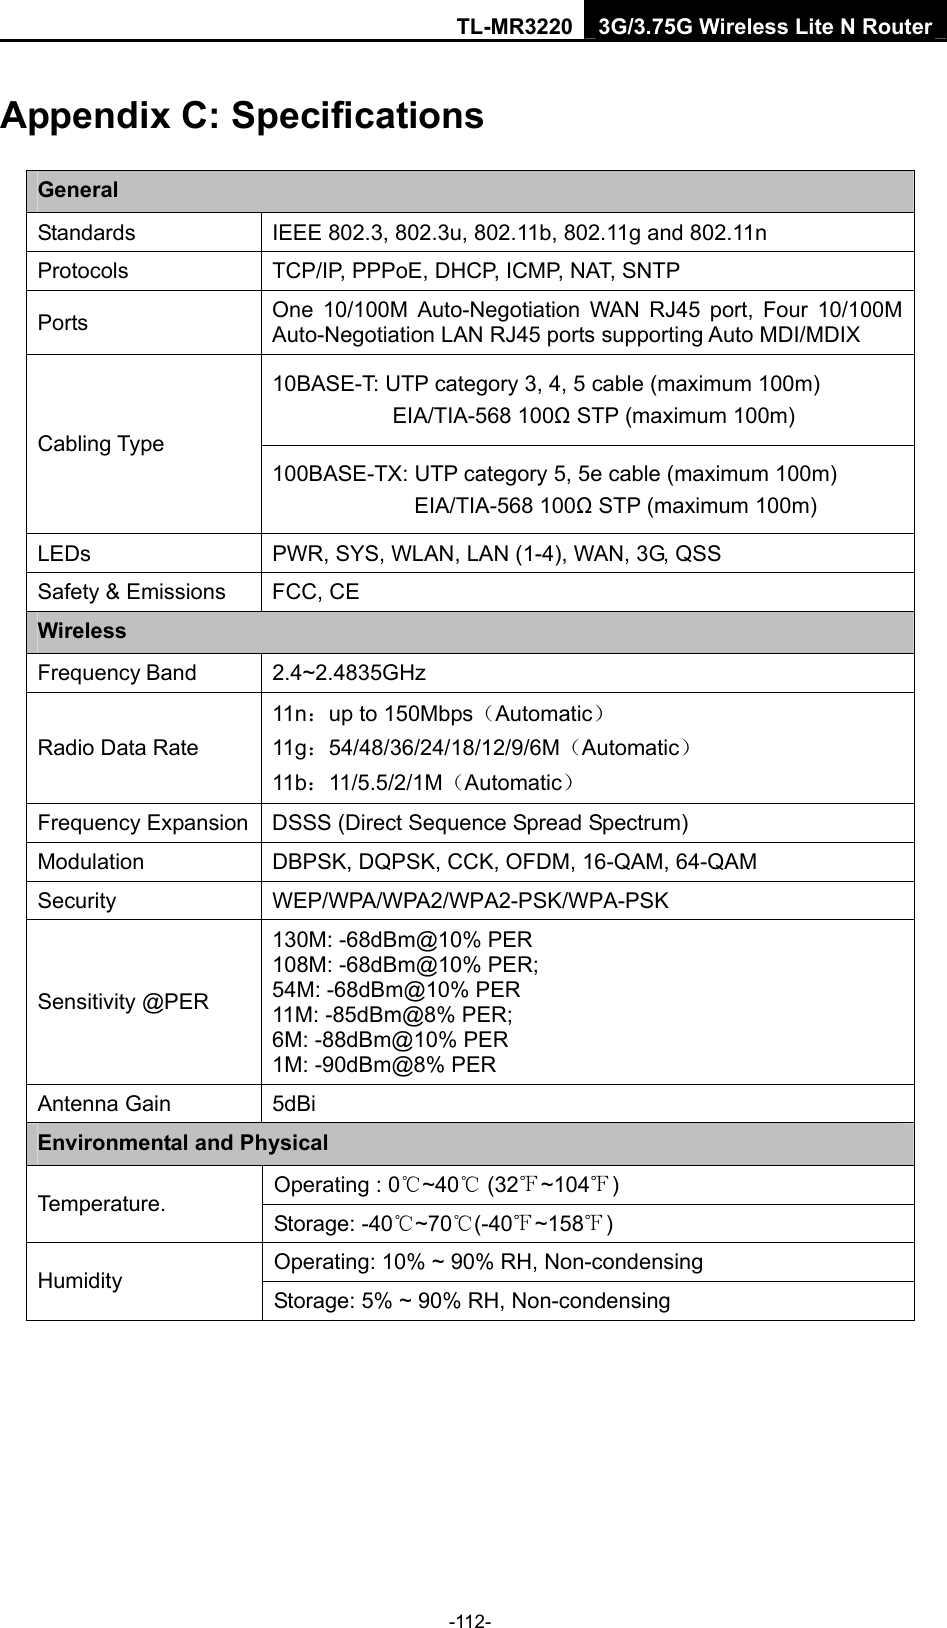 TL-MR3220 3G/3.75G Wireless Lite N Router -112- Appendix C: Specifications General Standards  IEEE 802.3, 802.3u, 802.11b, 802.11g and 802.11n Protocols  TCP/IP, PPPoE, DHCP, ICMP, NAT, SNTP Ports  One 10/100M Auto-Negotiation WAN RJ45 port, Four 10/100M Auto-Negotiation LAN RJ45 ports supporting Auto MDI/MDIX 10BASE-T: UTP category 3, 4, 5 cable (maximum 100m) EIA/TIA-568 100Ω STP (maximum 100m) Cabling Type 100BASE-TX: UTP category 5, 5e cable (maximum 100m) EIA/TIA-568 100Ω STP (maximum 100m) LEDs  PWR, SYS, WLAN, LAN (1-4), WAN, 3G, QSS Safety &amp; Emissions  FCC, CE Wireless Frequency Band 2.4~2.4835GHz Radio Data Rate 11n：up to 150Mbps（Automatic） 11g：54/48/36/24/18/12/9/6M（Automatic） 11b：11/5.5/2/1M（Automatic） Frequency Expansion  DSSS (Direct Sequence Spread Spectrum) Modulation  DBPSK, DQPSK, CCK, OFDM, 16-QAM, 64-QAM Security WEP/WPA/WPA2/WPA2-PSK/WPA-PSK Sensitivity @PER 130M: -68dBm@10% PER 108M: -68dBm@10% PER;   54M: -68dBm@10% PER 11M: -85dBm@8% PER;   6M: -88dBm@10% PER 1M: -90dBm@8% PER Antenna Gain  5dBi Environmental and Physical Operating : 0℃~40℃ (32 ~104℉℉) Temperature.  Storage: -40℃~70℃(-40℉~158℉) Operating: 10% ~ 90% RH, Non-condensing Humidity  Storage: 5% ~ 90% RH, Non-condensing 